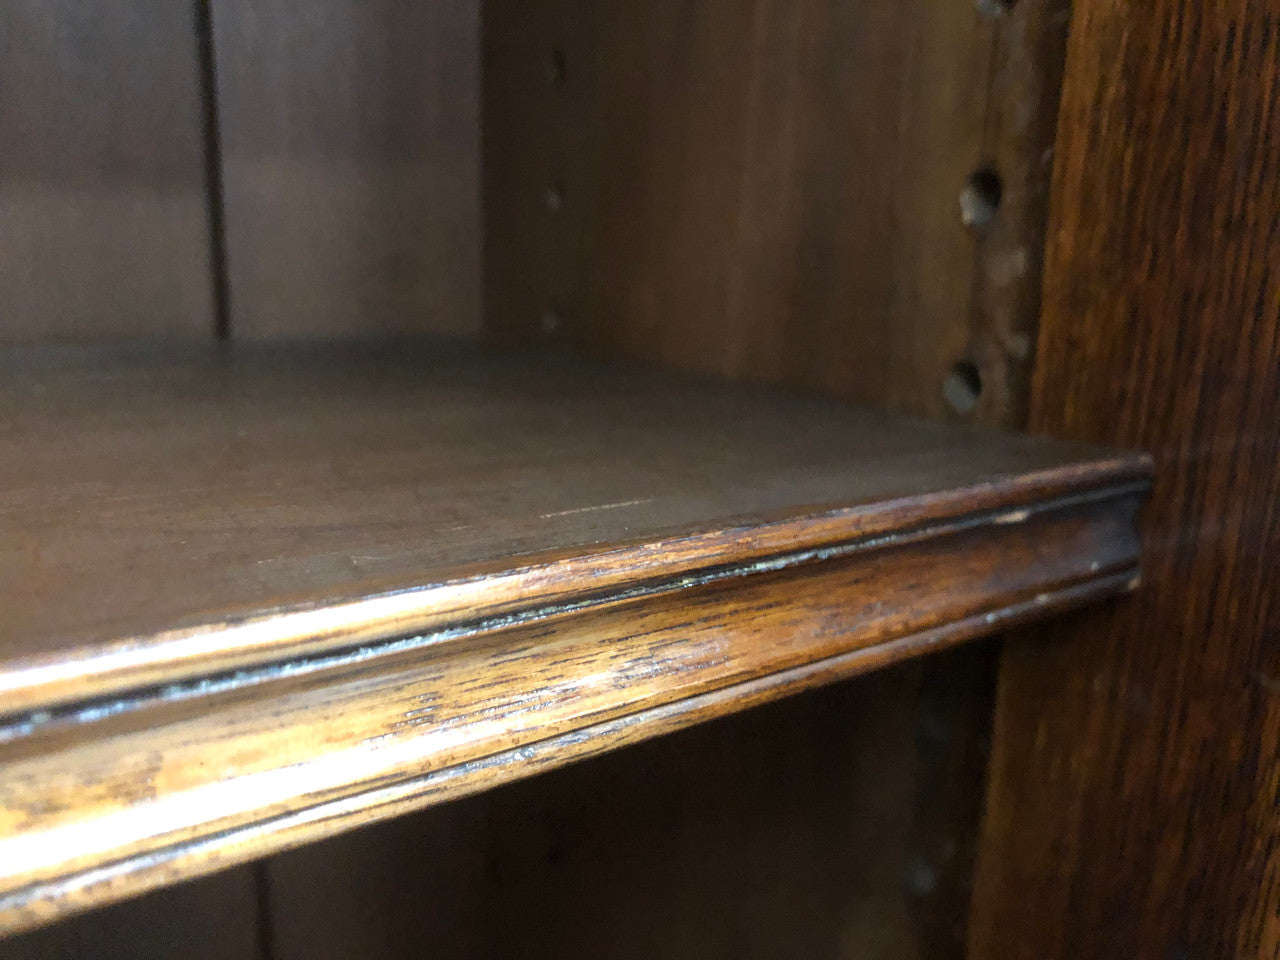 Amazing six-door Oak English bookcase sourced from France. The top section has adjustable shelves and plenty of storage space below which has fixed shelves. Keys and locks in working condition. In good original detailed condition. Circa 1880.